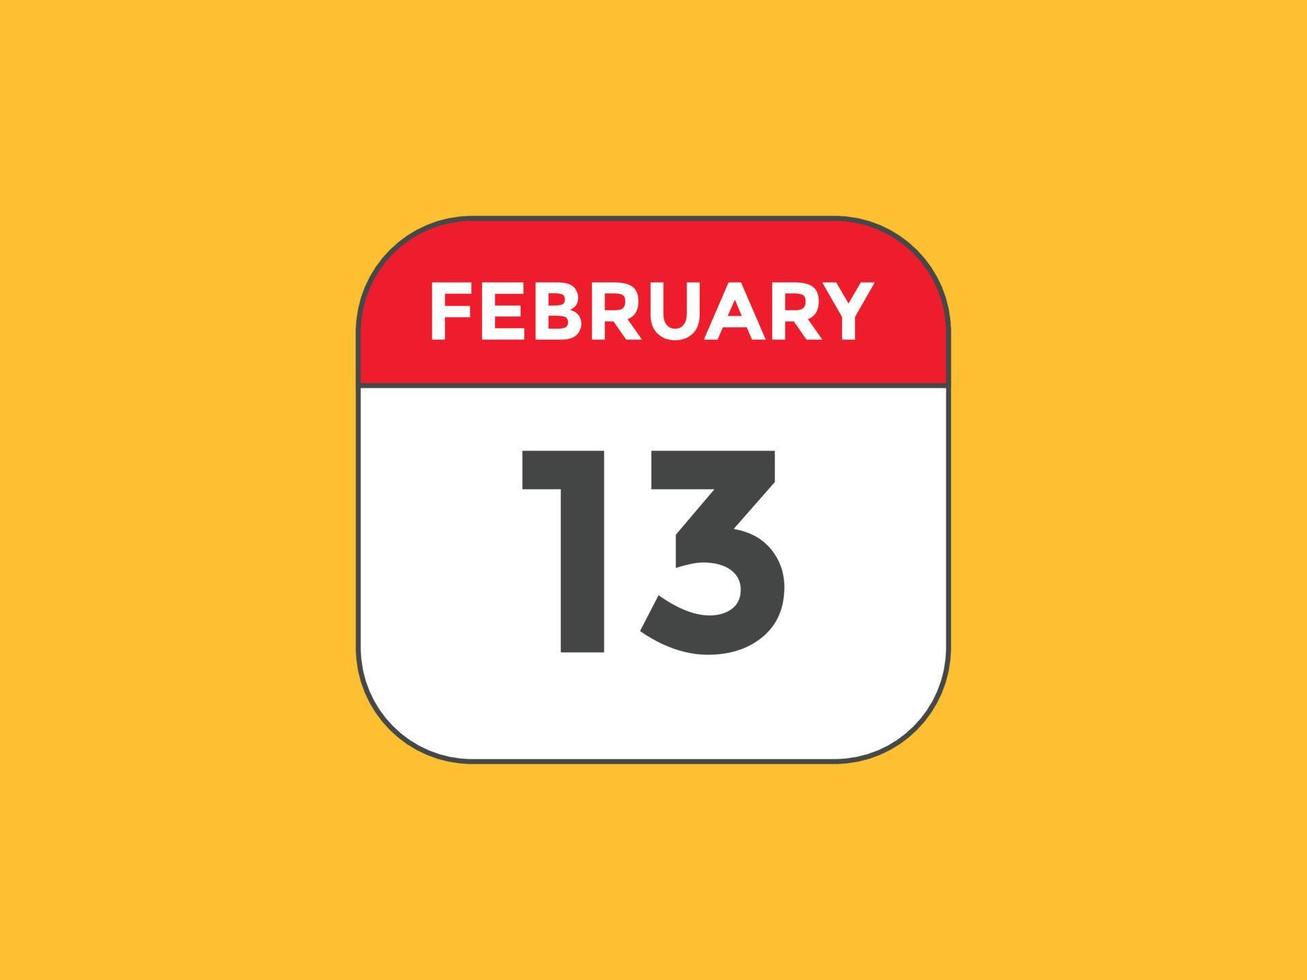 february 13 calendar reminder. 13th february daily calendar icon template. Calendar 13th february icon Design template. Vector illustration